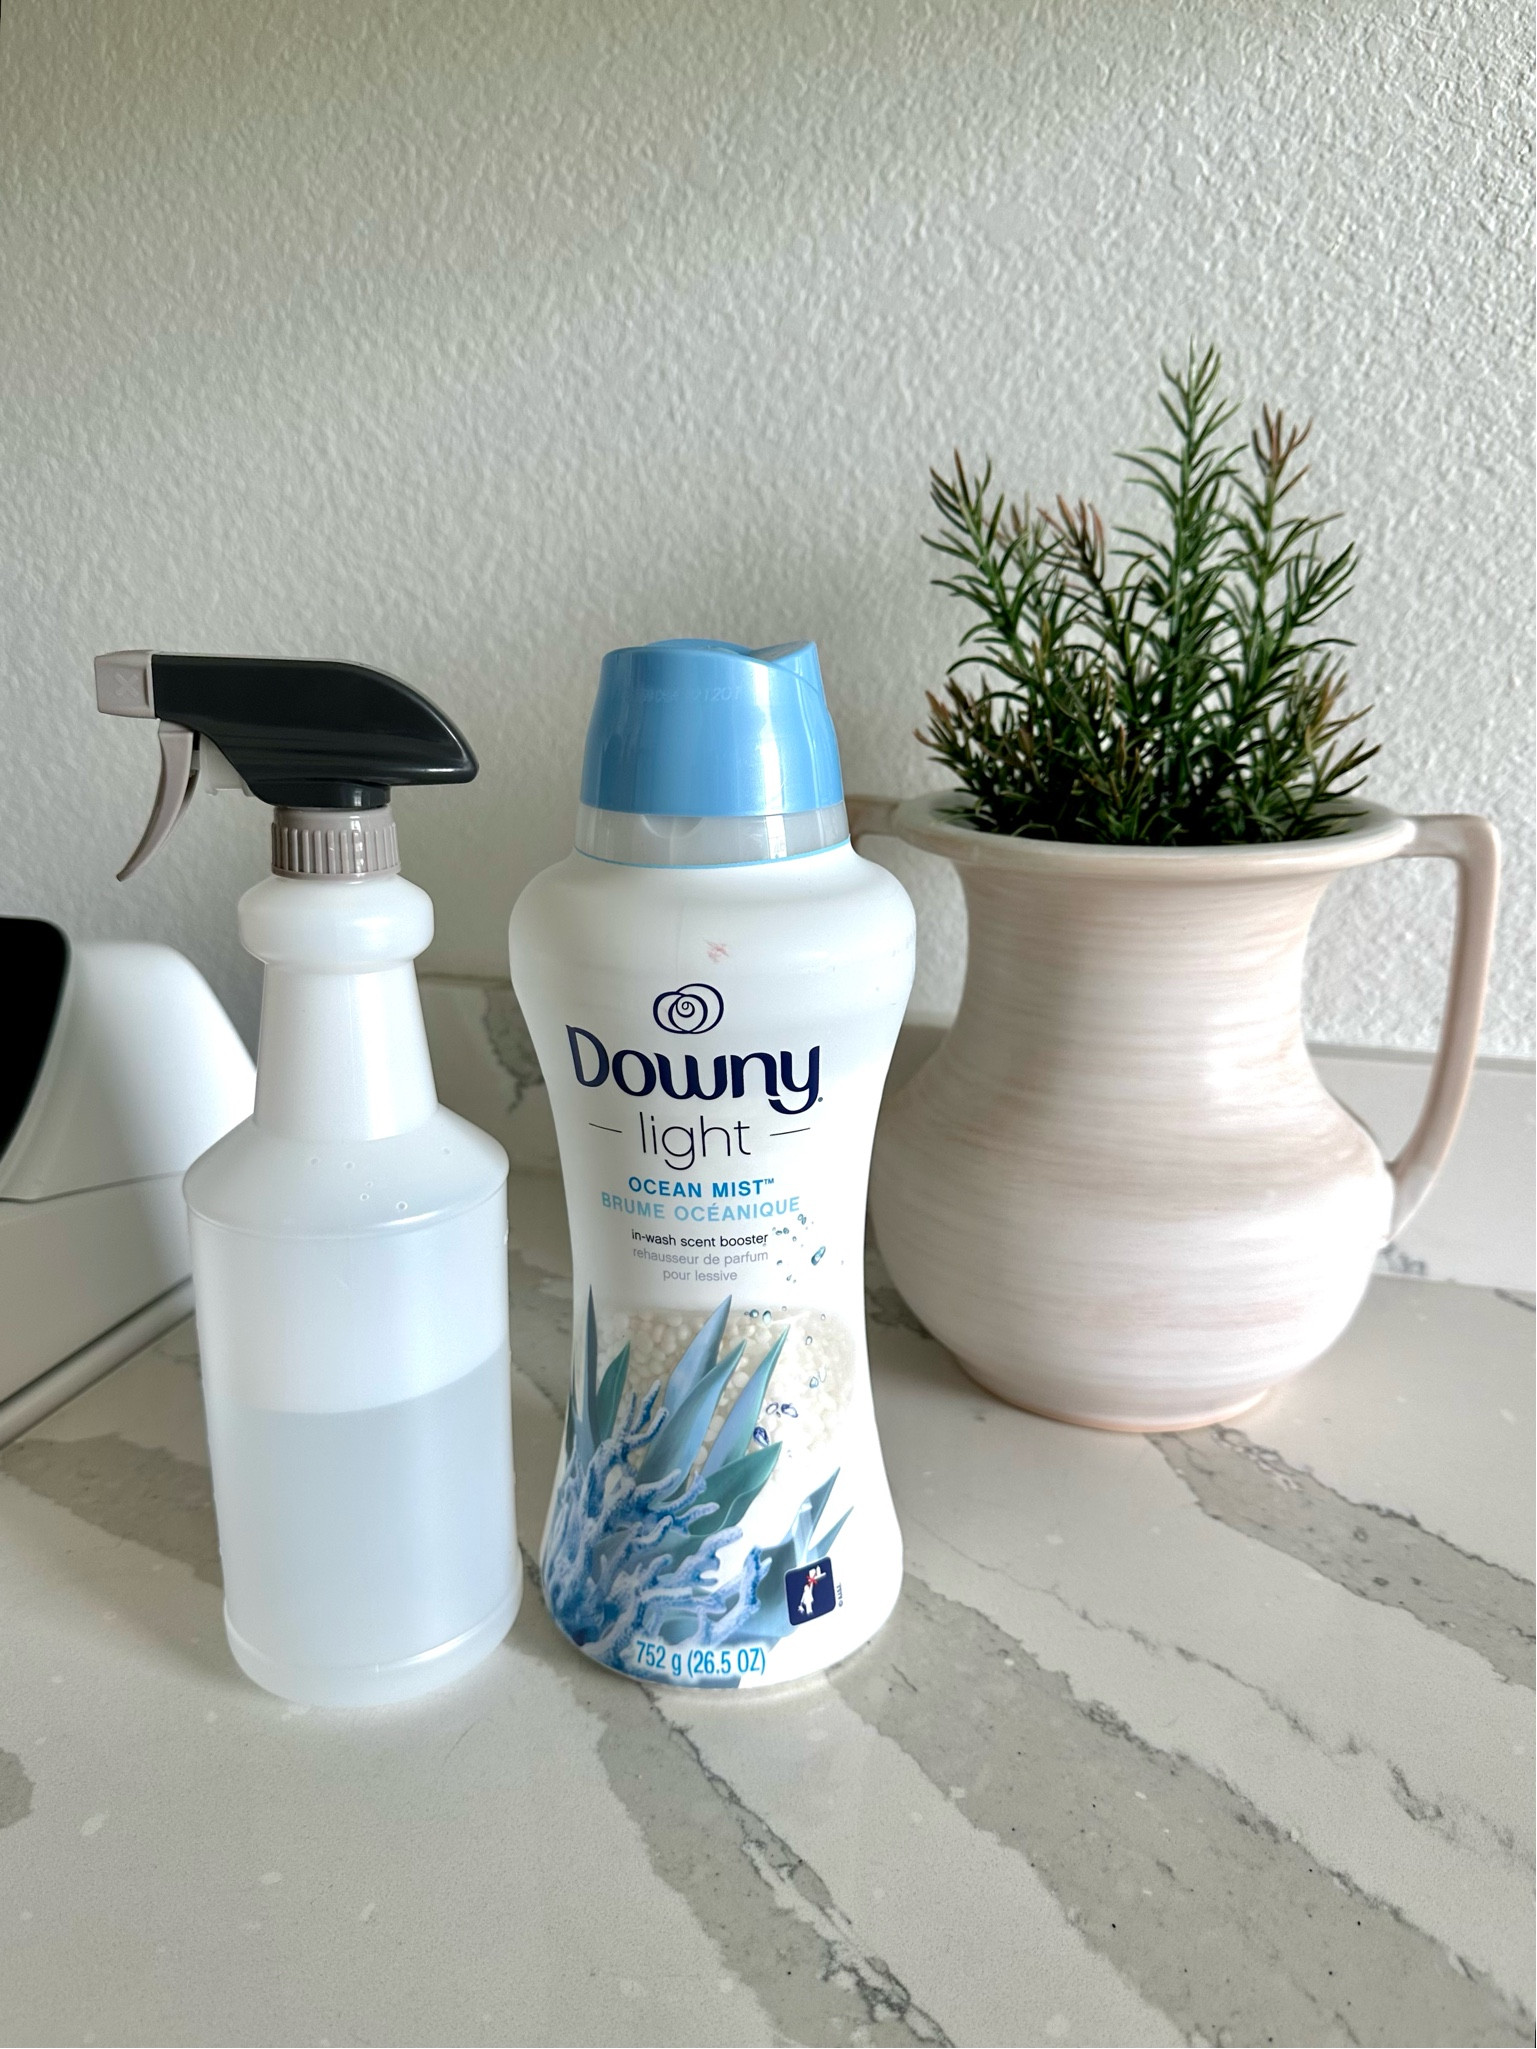 Downy Light In-Wash Scent Booster, Ocean Mist - 752 g